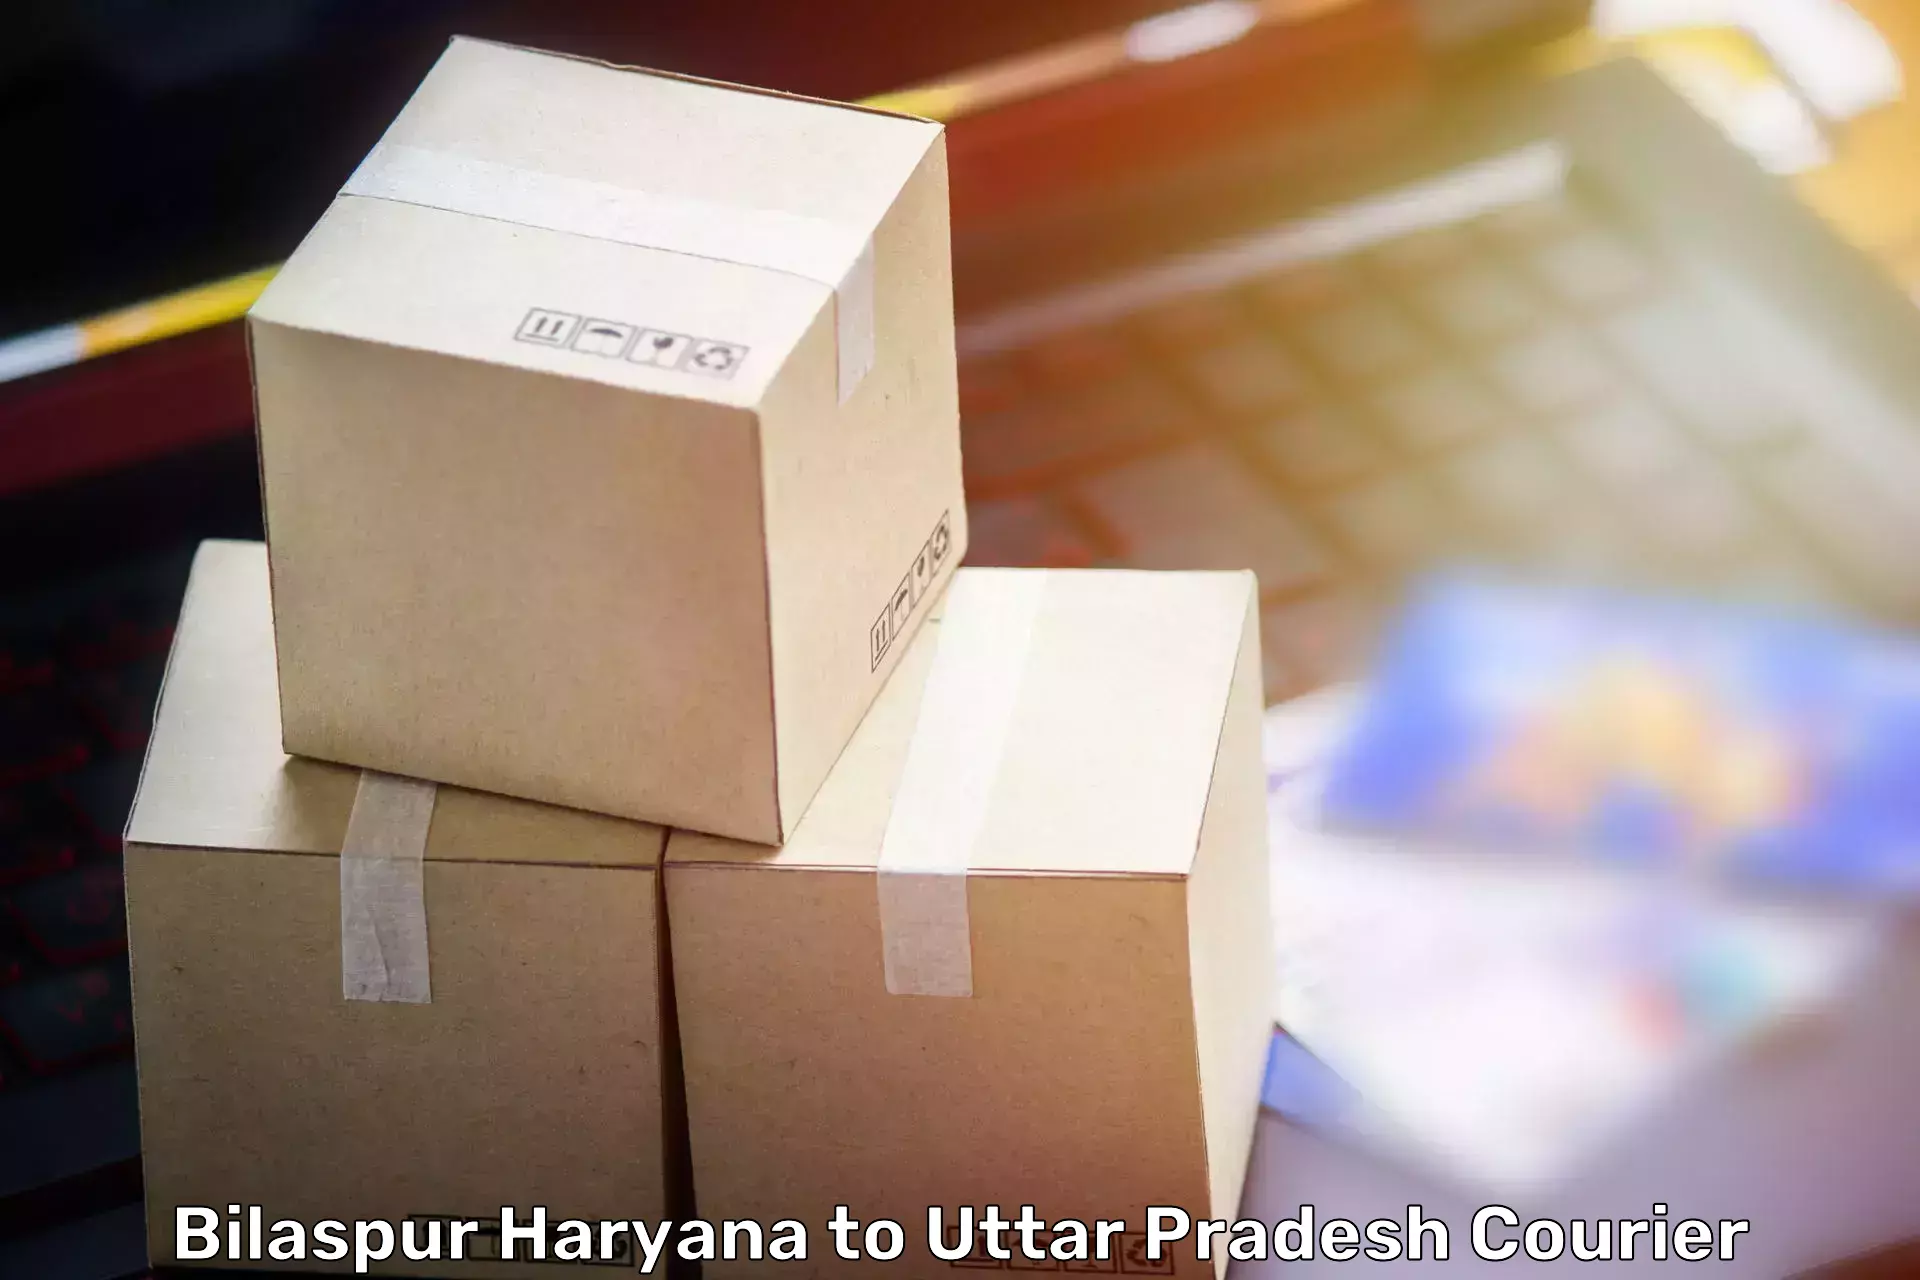 Professional packing services Bilaspur Haryana to Ayodhya